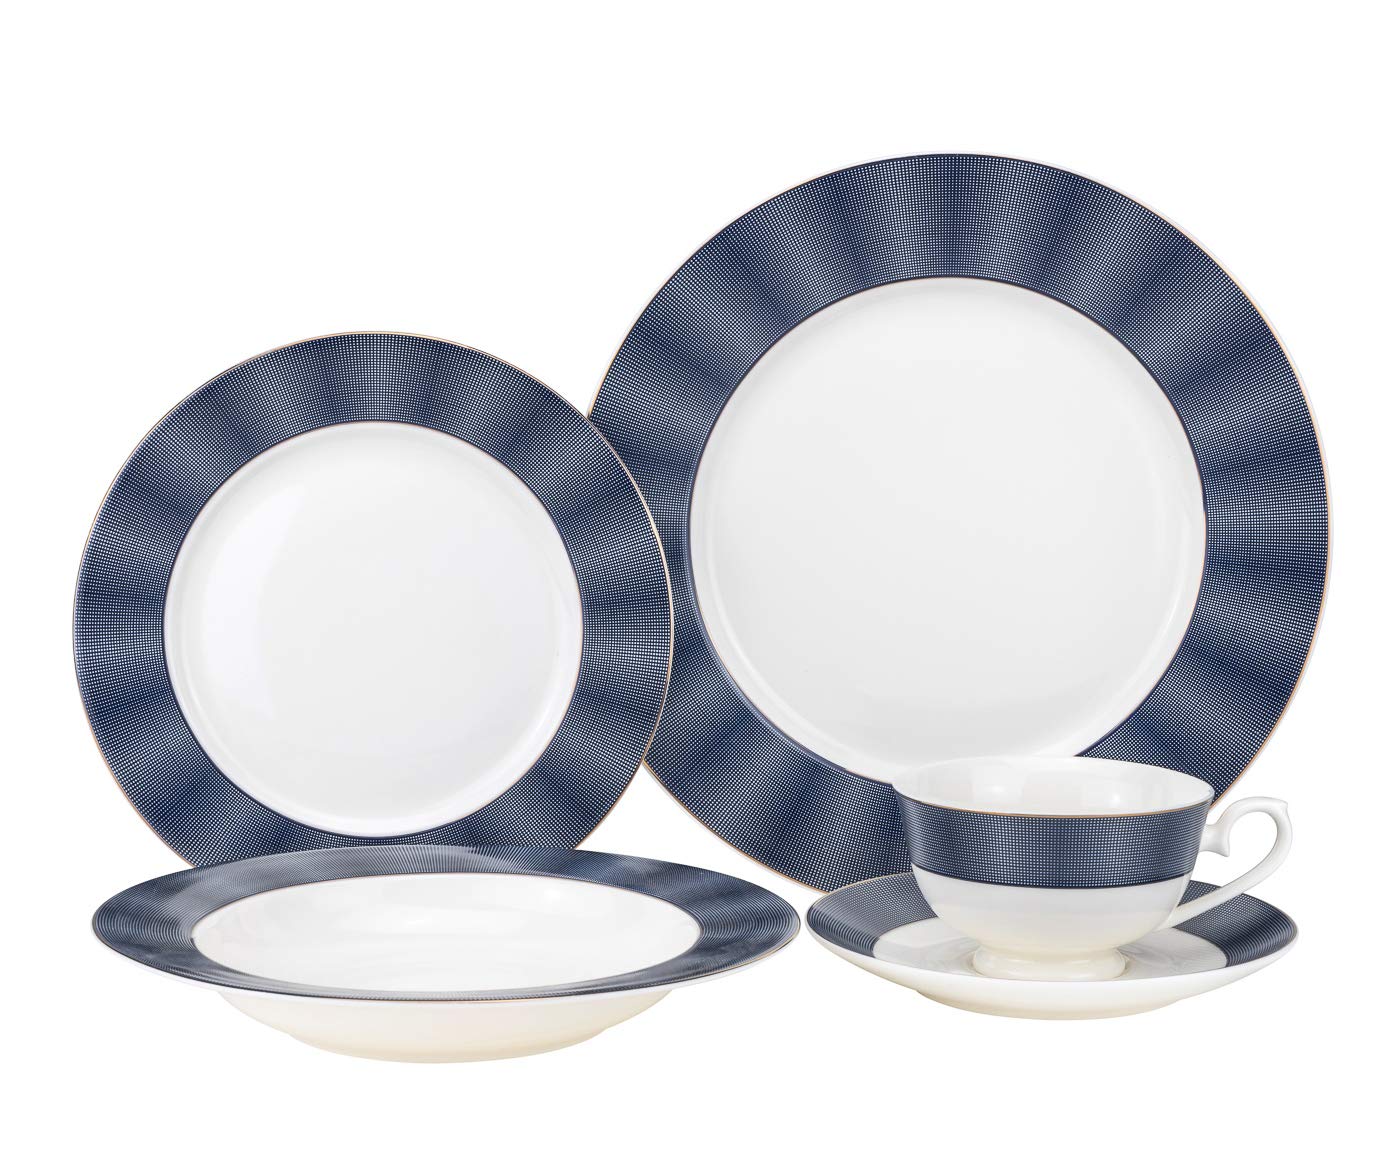 Euro Porcelain 5-Piece Dinner Set Service for 1, 24K Gold-plated Luxury Bone China Tableware - image 1 of 2